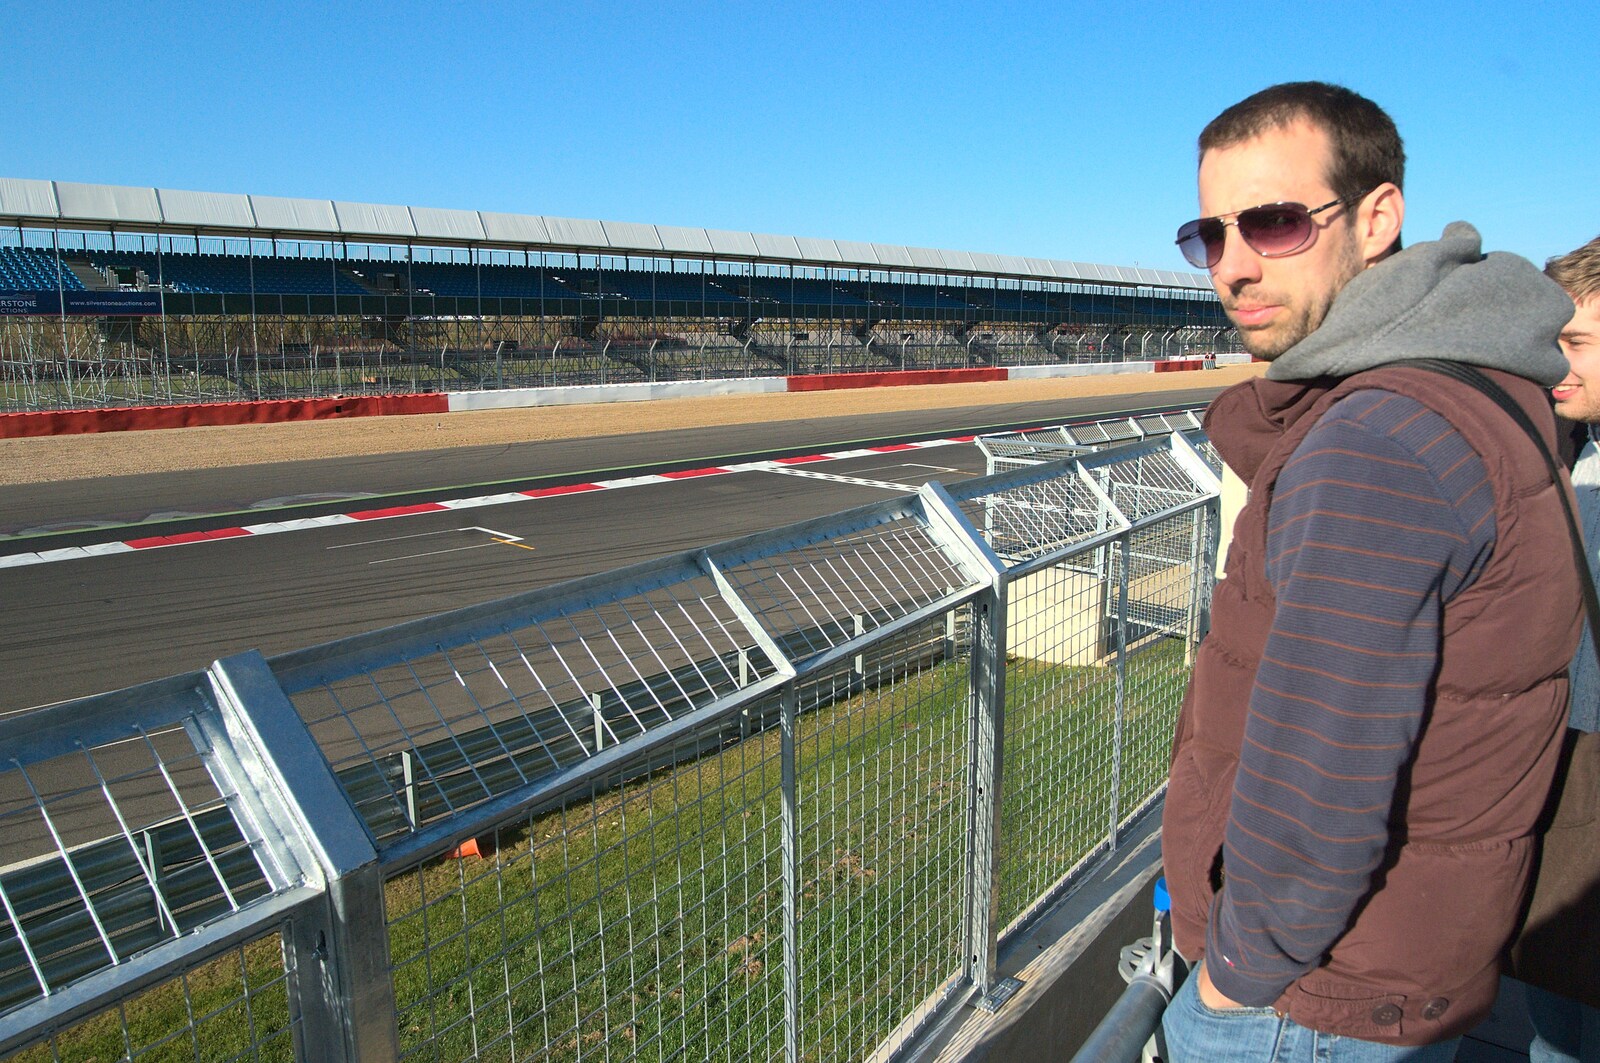 Ben surveys the track from TouchType at Silverstone, Northamptonshire - 22nd October 2011